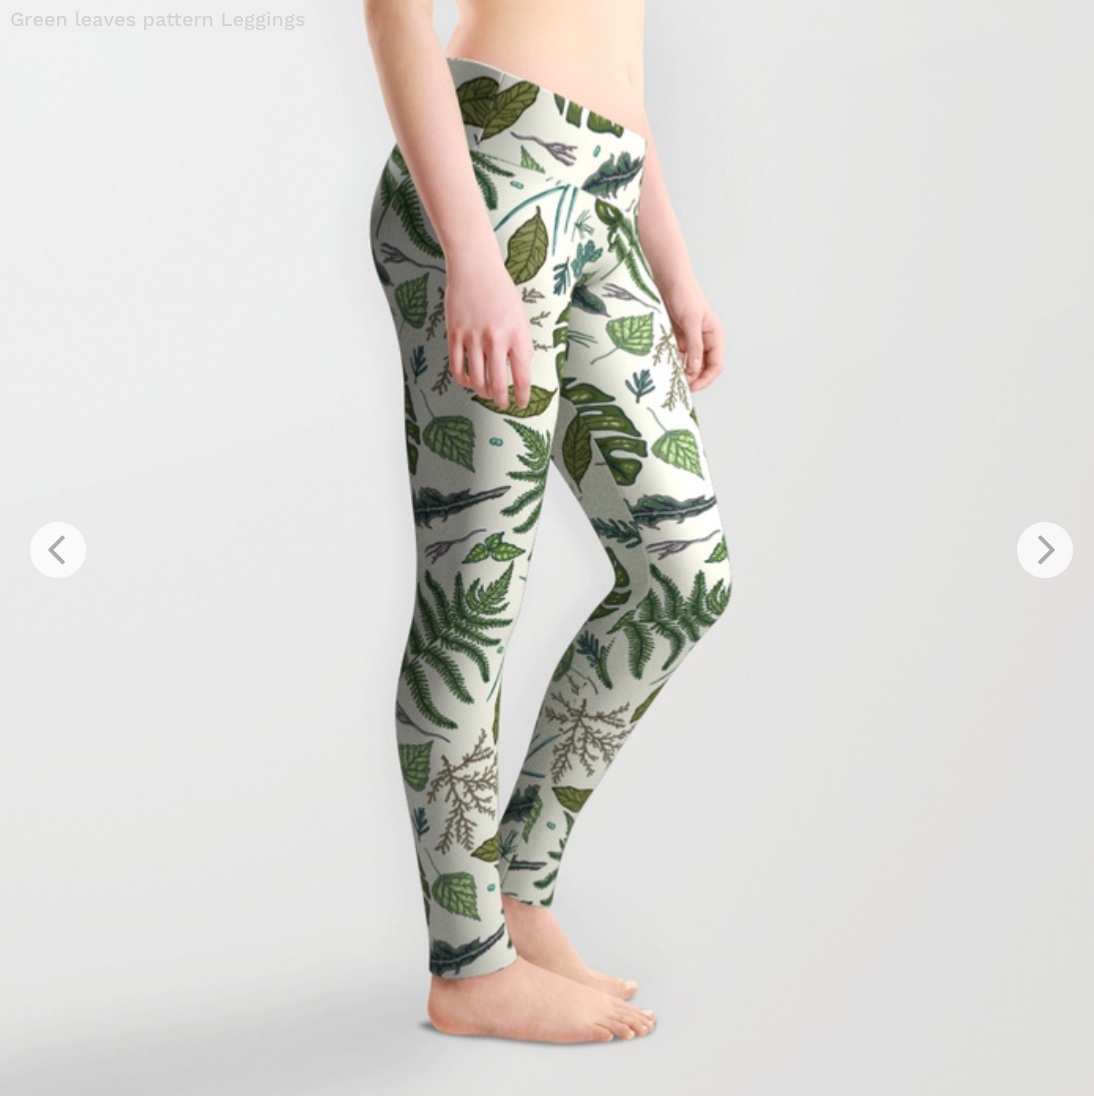 Green leaves pattern Leggings by smalldrawing | Society6